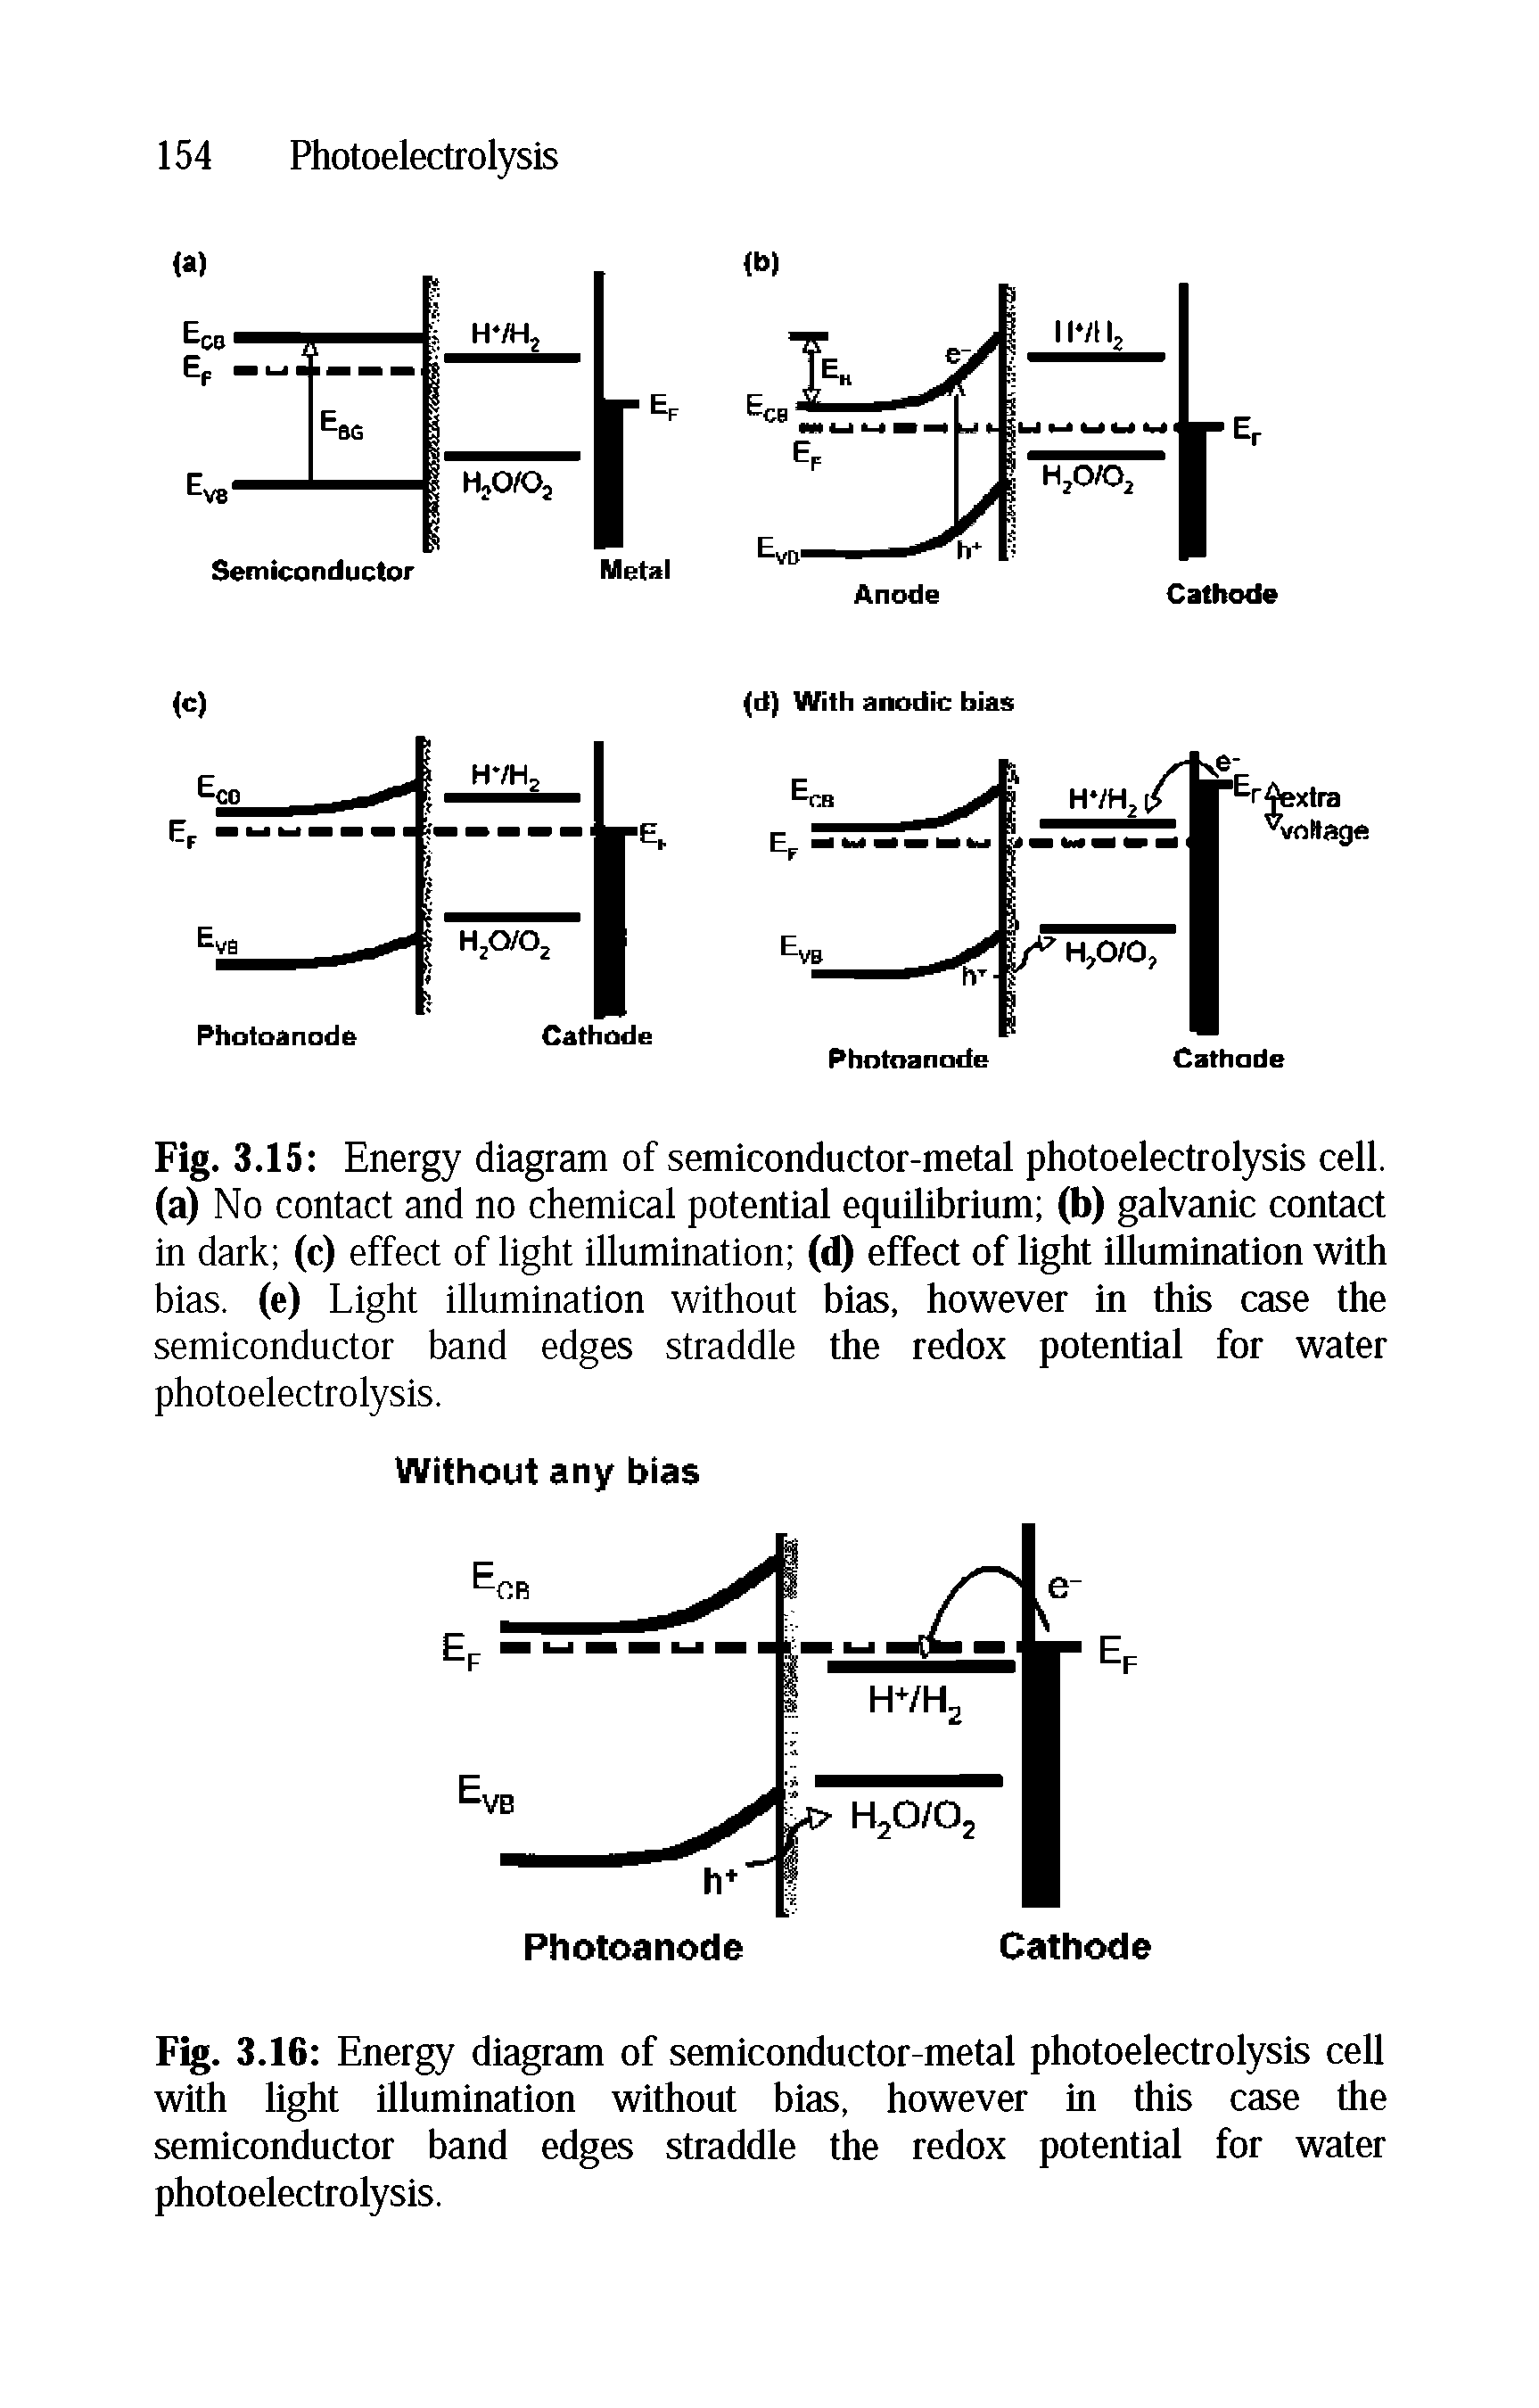 Fig. 3.15 Energy diagram of semiconductor-metal photoelectrolysis cell, (a) No contact and no chemical potential equilibrium (b) galvanic contact in dark (c) effect of light illumination (d) effect of light illumination with bias, (e) Light illumination without bias, however in this case the semiconductor band edges straddle the redox potential for water photoelectrolysis.